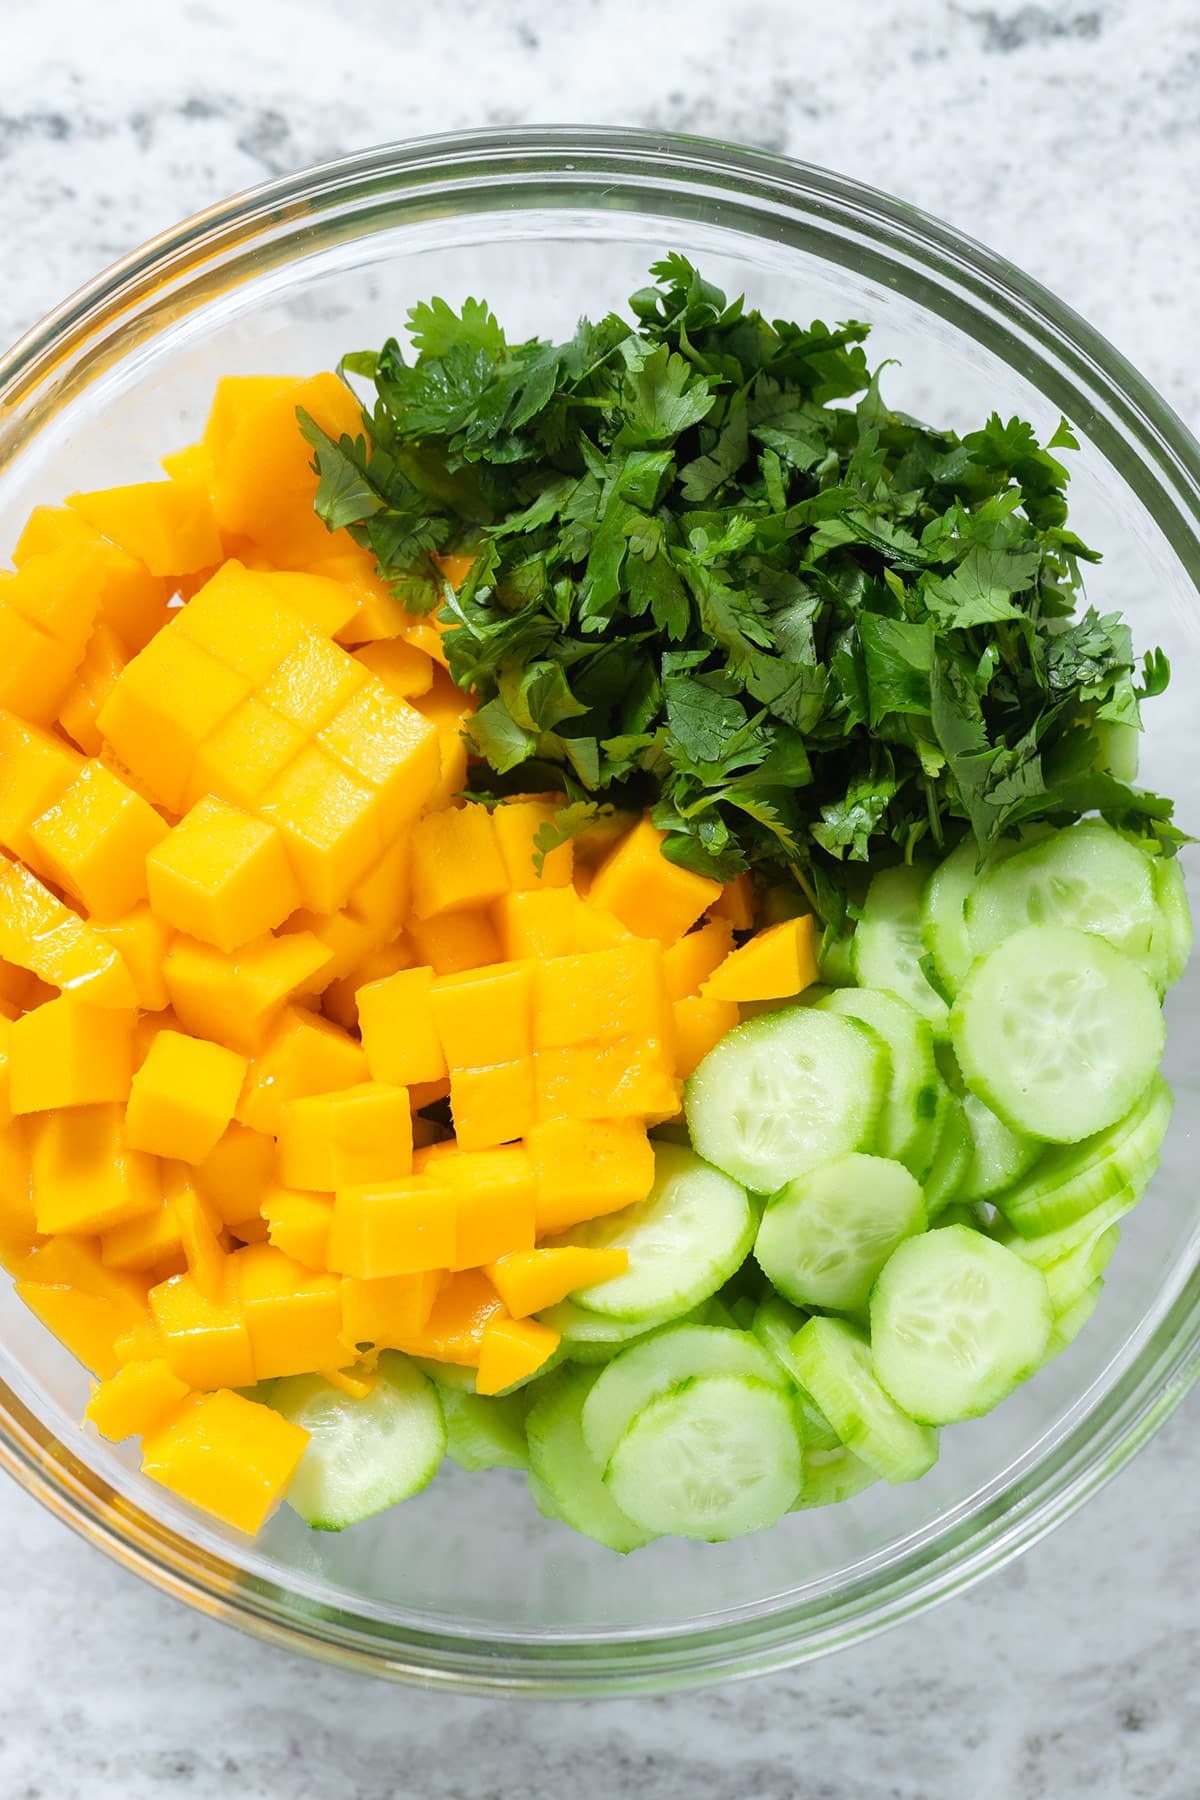 Diced mango, sliced cucumber, and chopped cilantro in a glass bowl on a grey stone background.